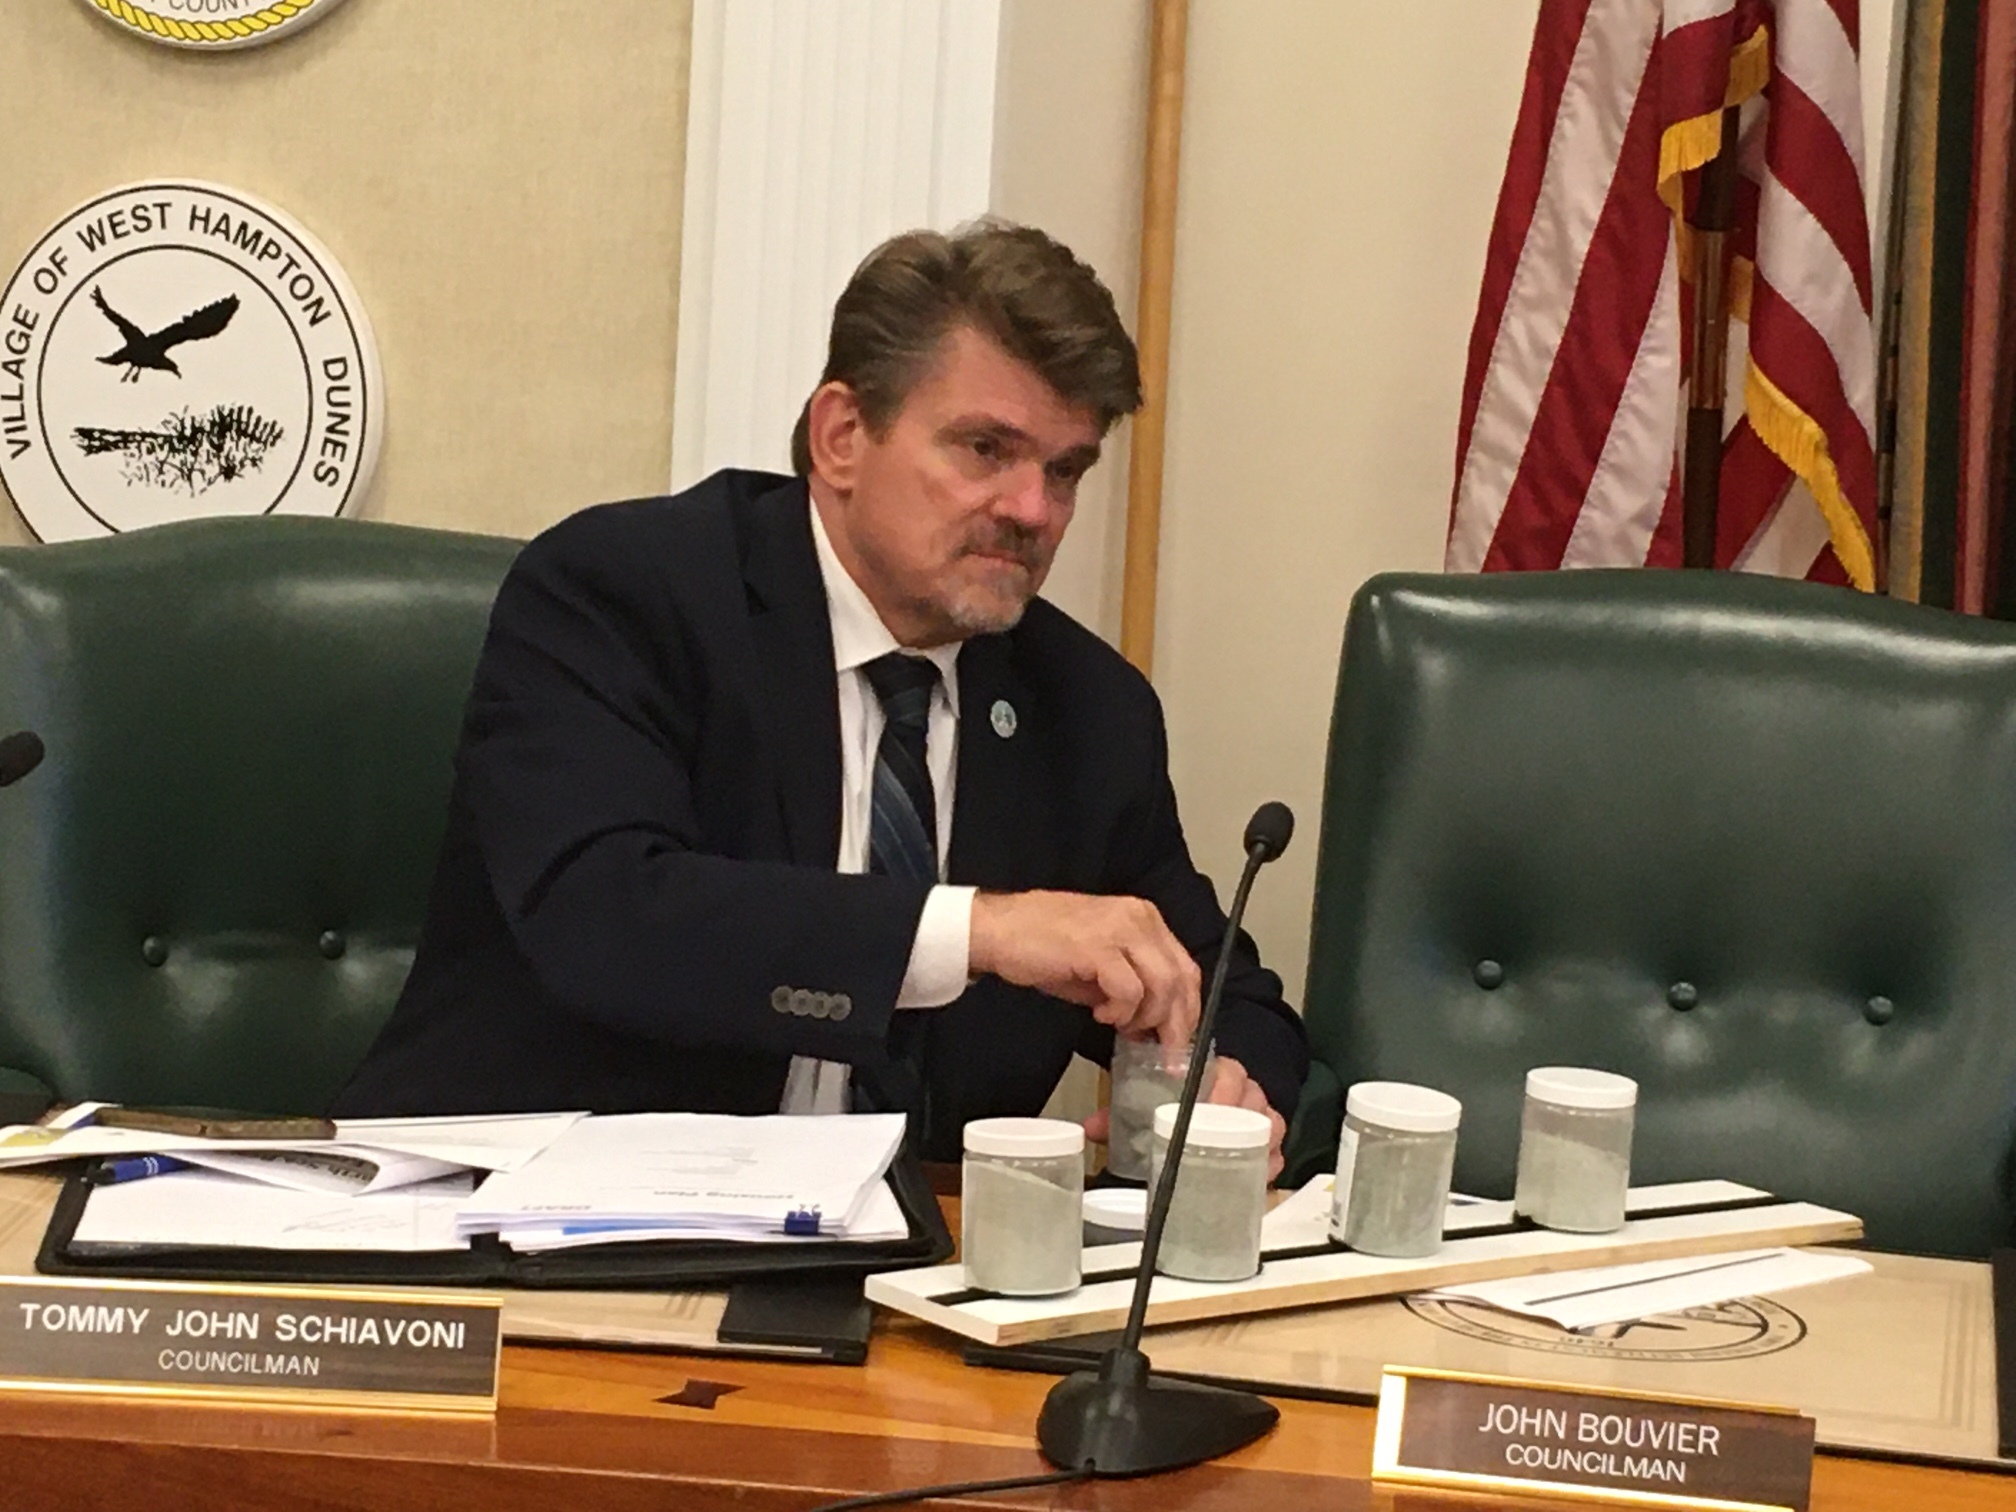 Councilman Tommy John Schiavoni examines olivine  samples during the hands on portion of the Southampton Town Board work session.